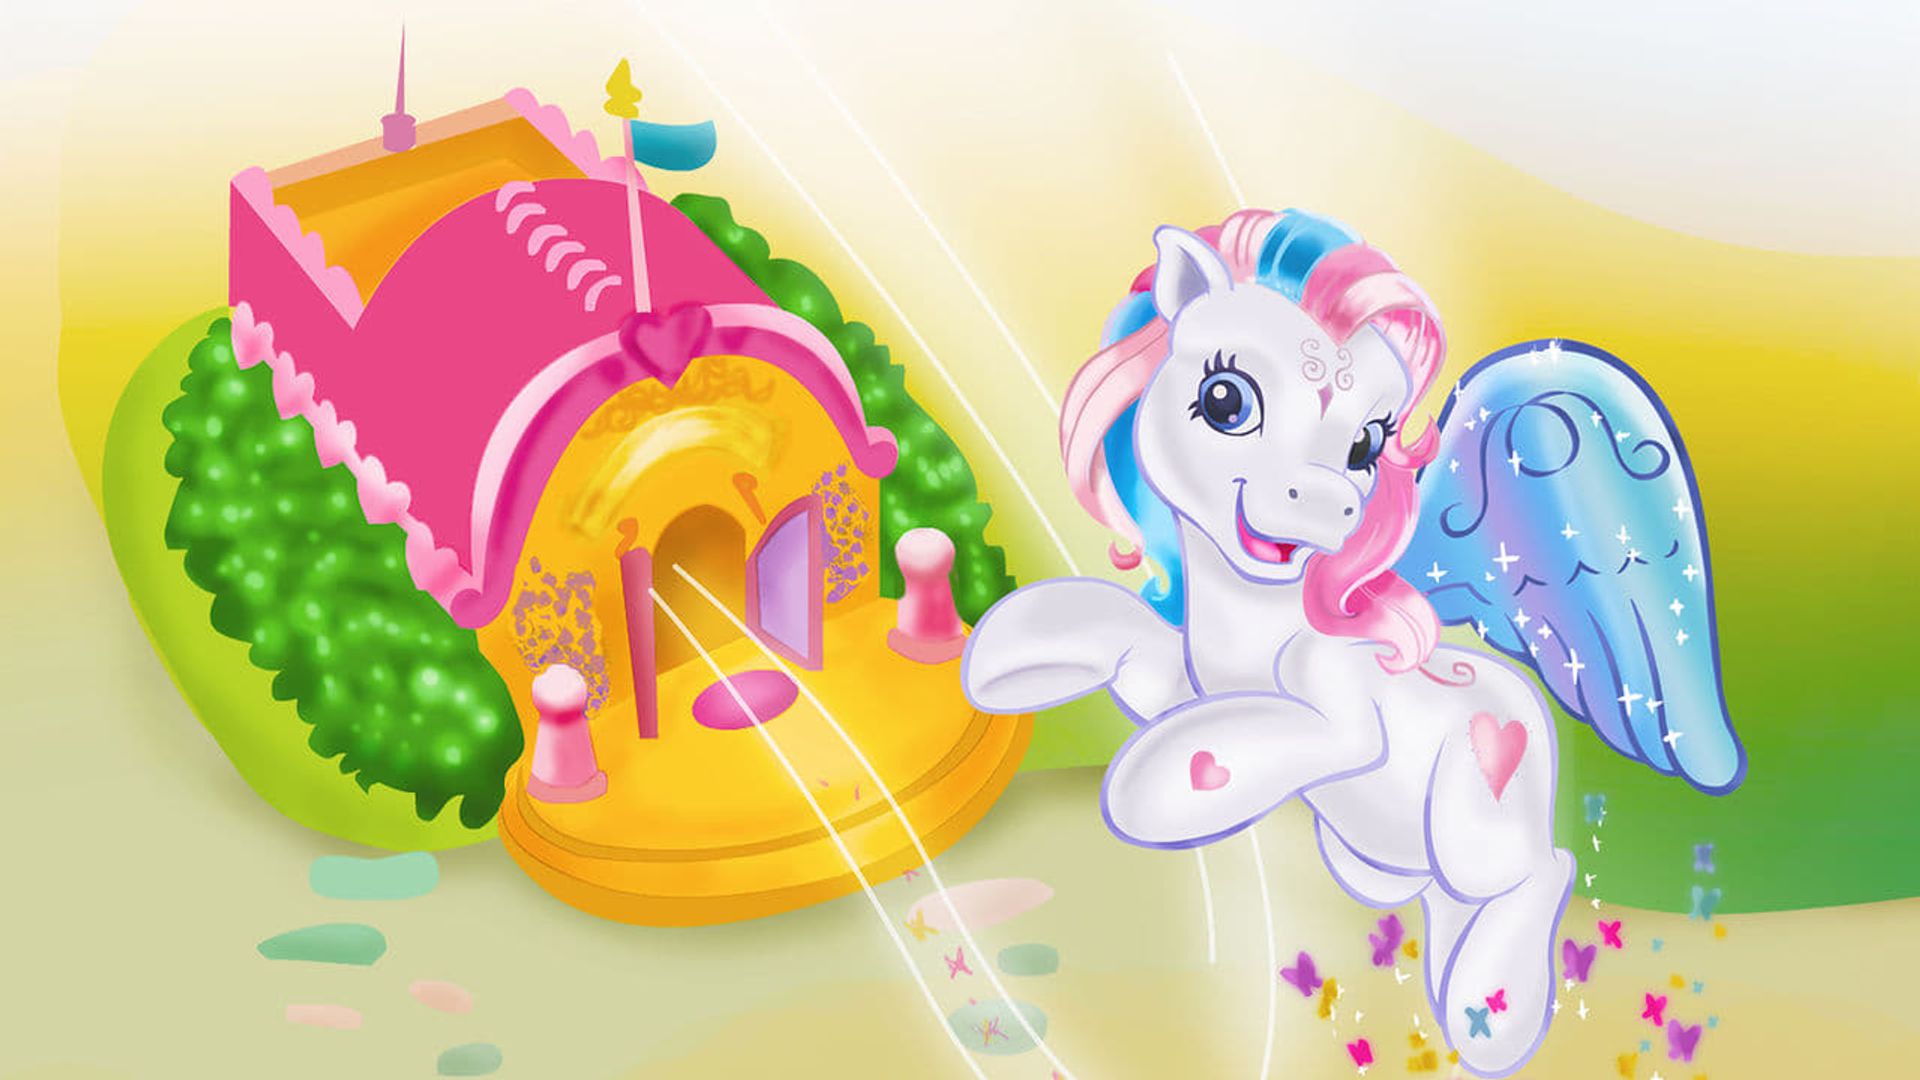 My Little Pony: Dancing in the Clouds background